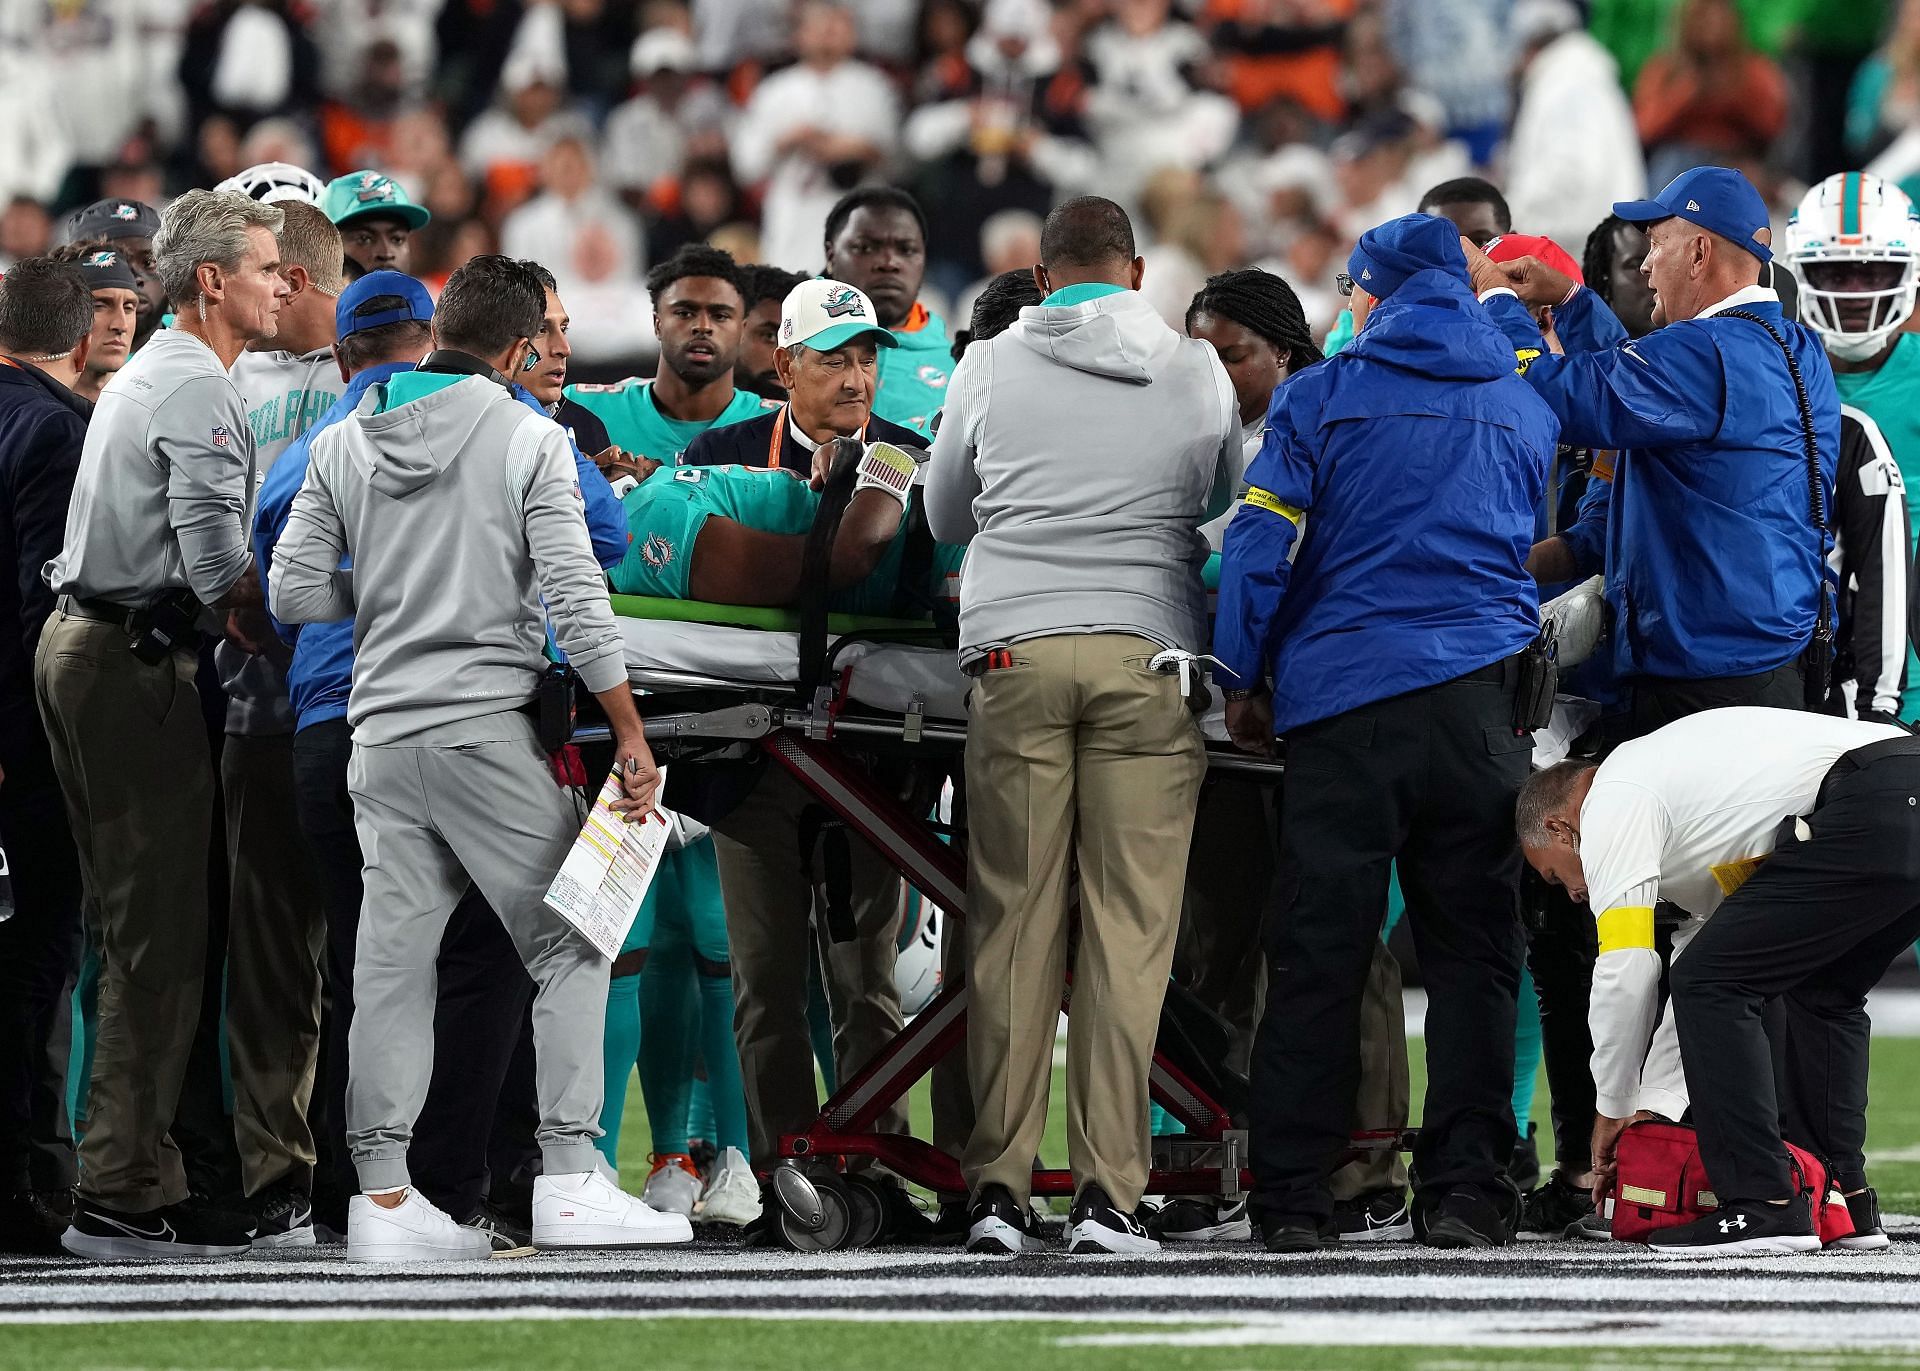 The quarterback had to be stretchered off